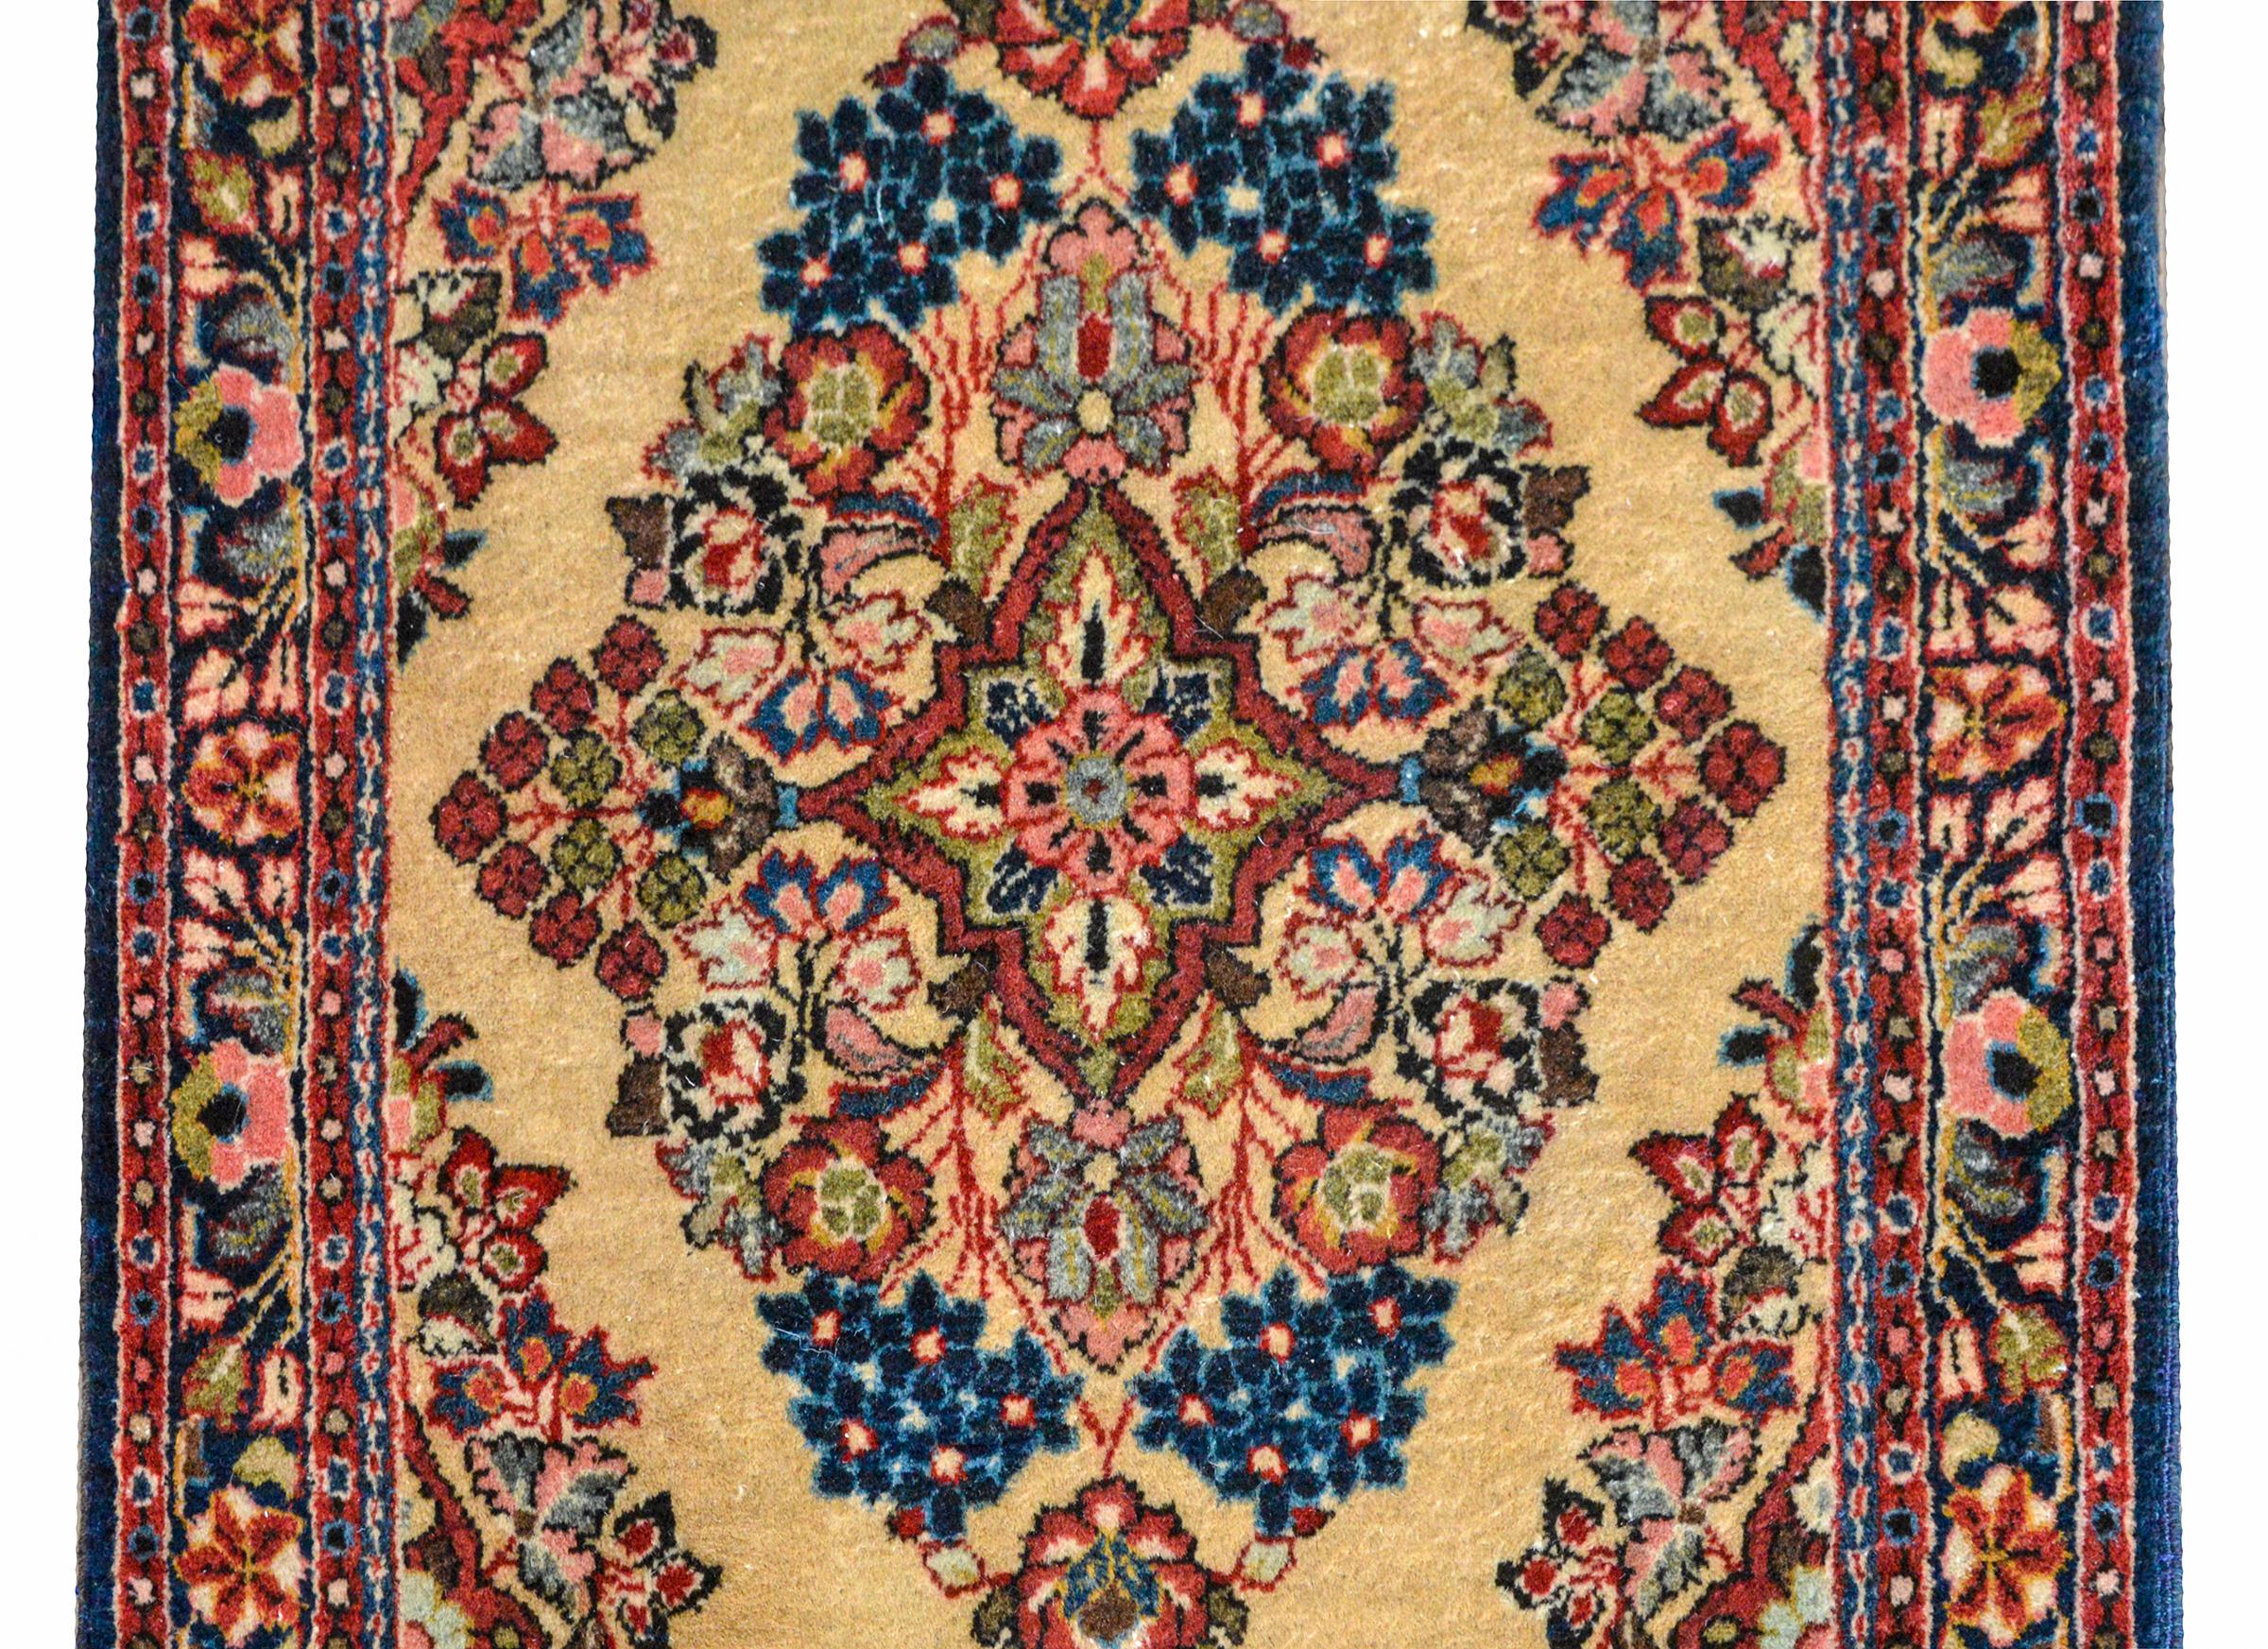 A wonderful early 20th century Persian Sarouk rug woven with a central floral medallion woven in light and dark indigo, green, pink, and cream, set against a champagne colors background, and surrounded by a border woven with similar flowers as the